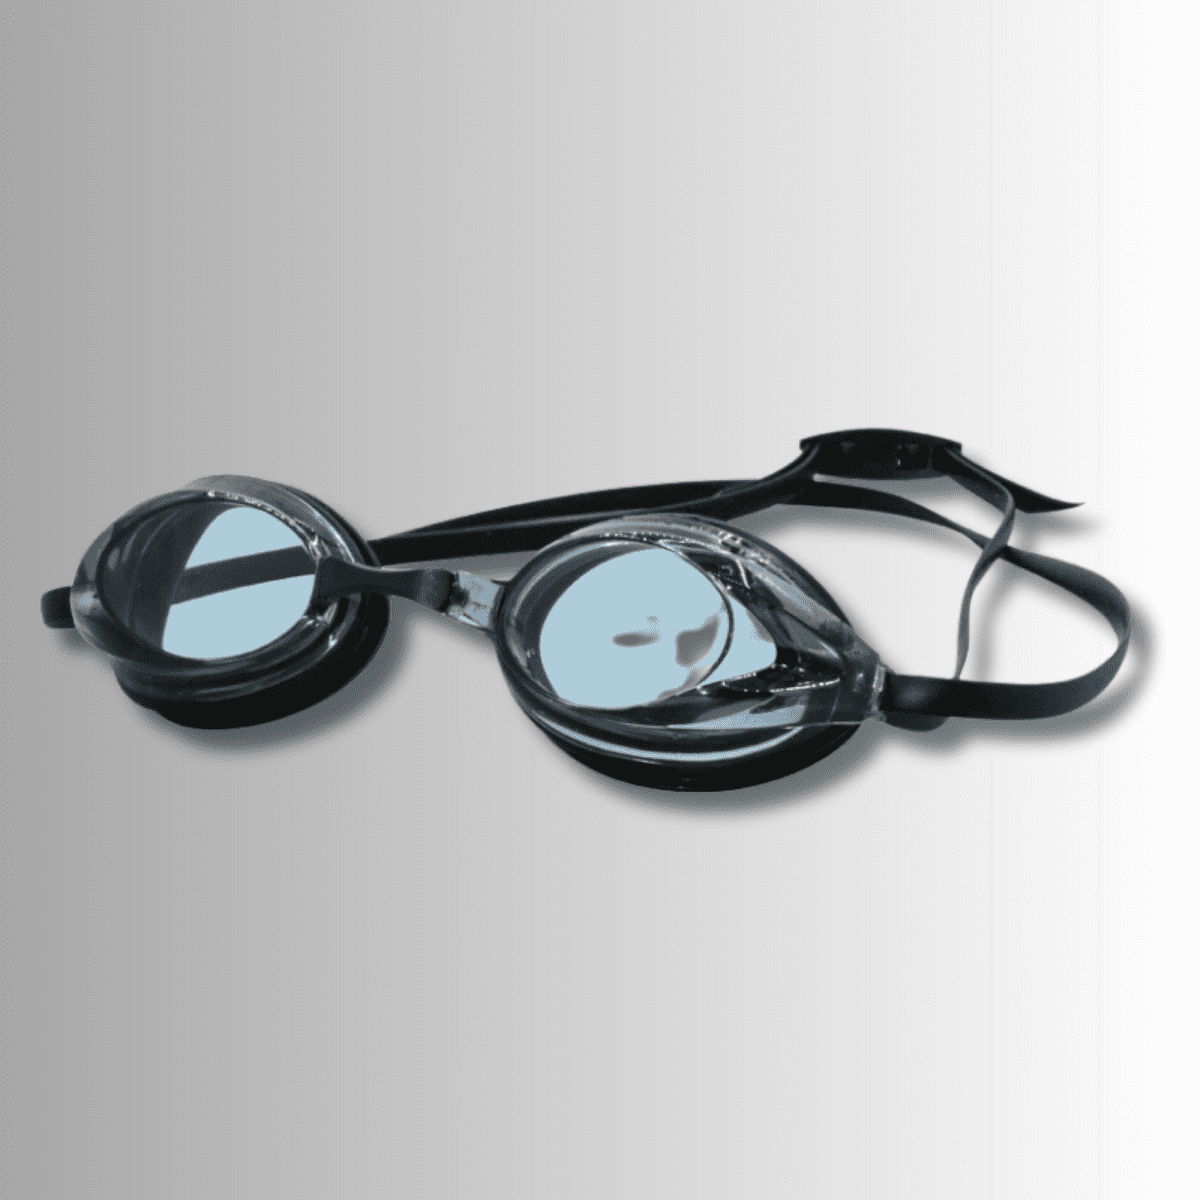 Adult Professional Anti-fog Swimming Goggles - Sporty Types